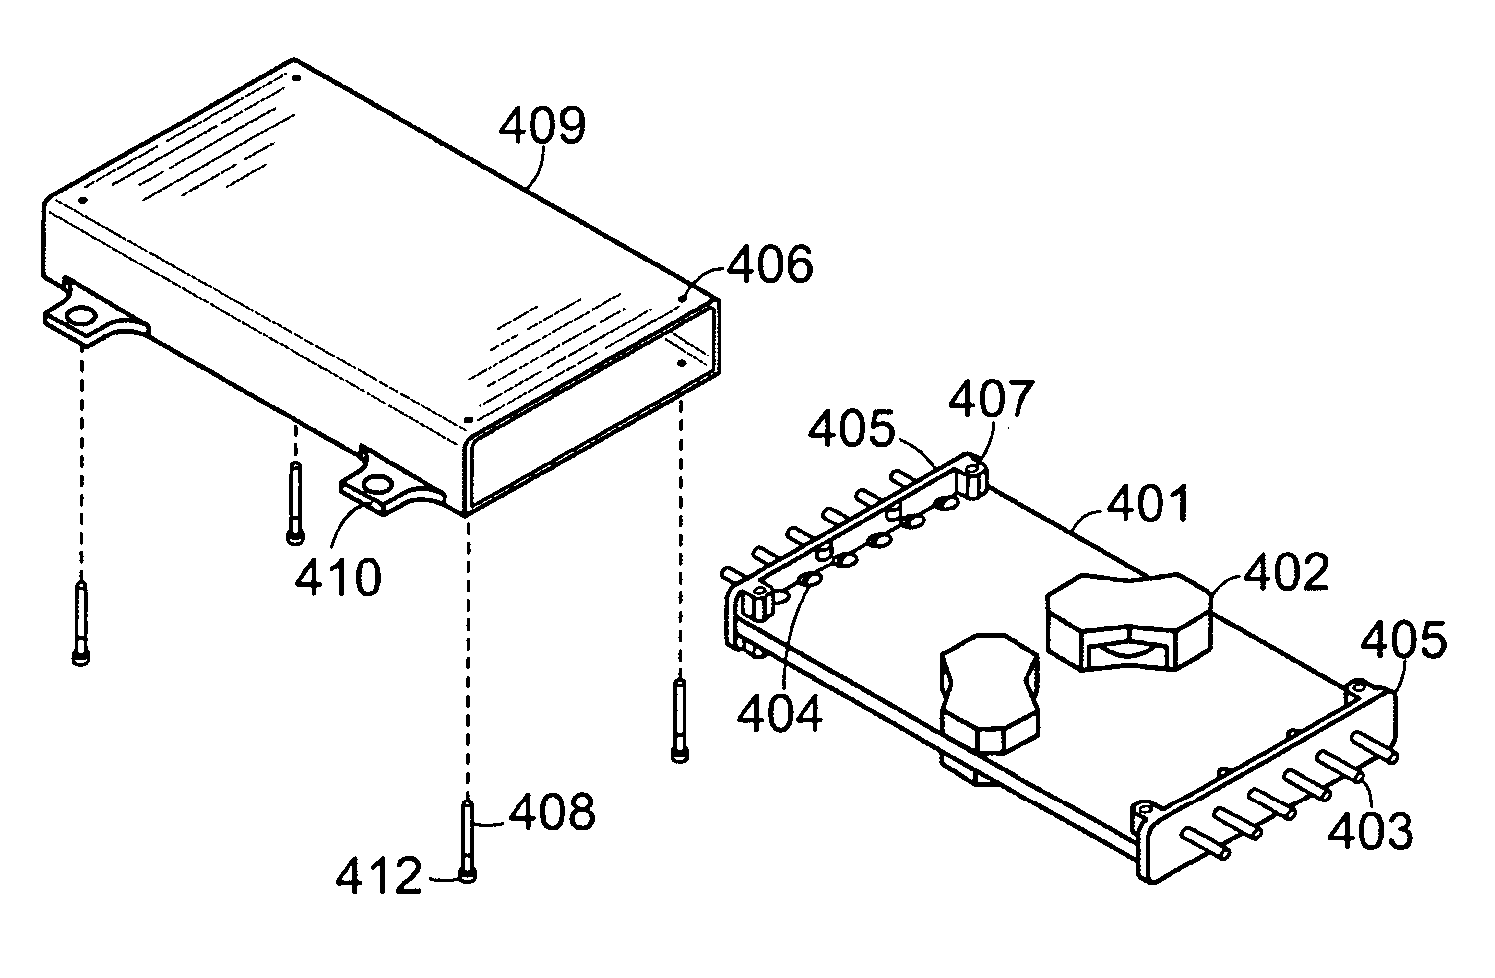 Mechanical packaging of electronics